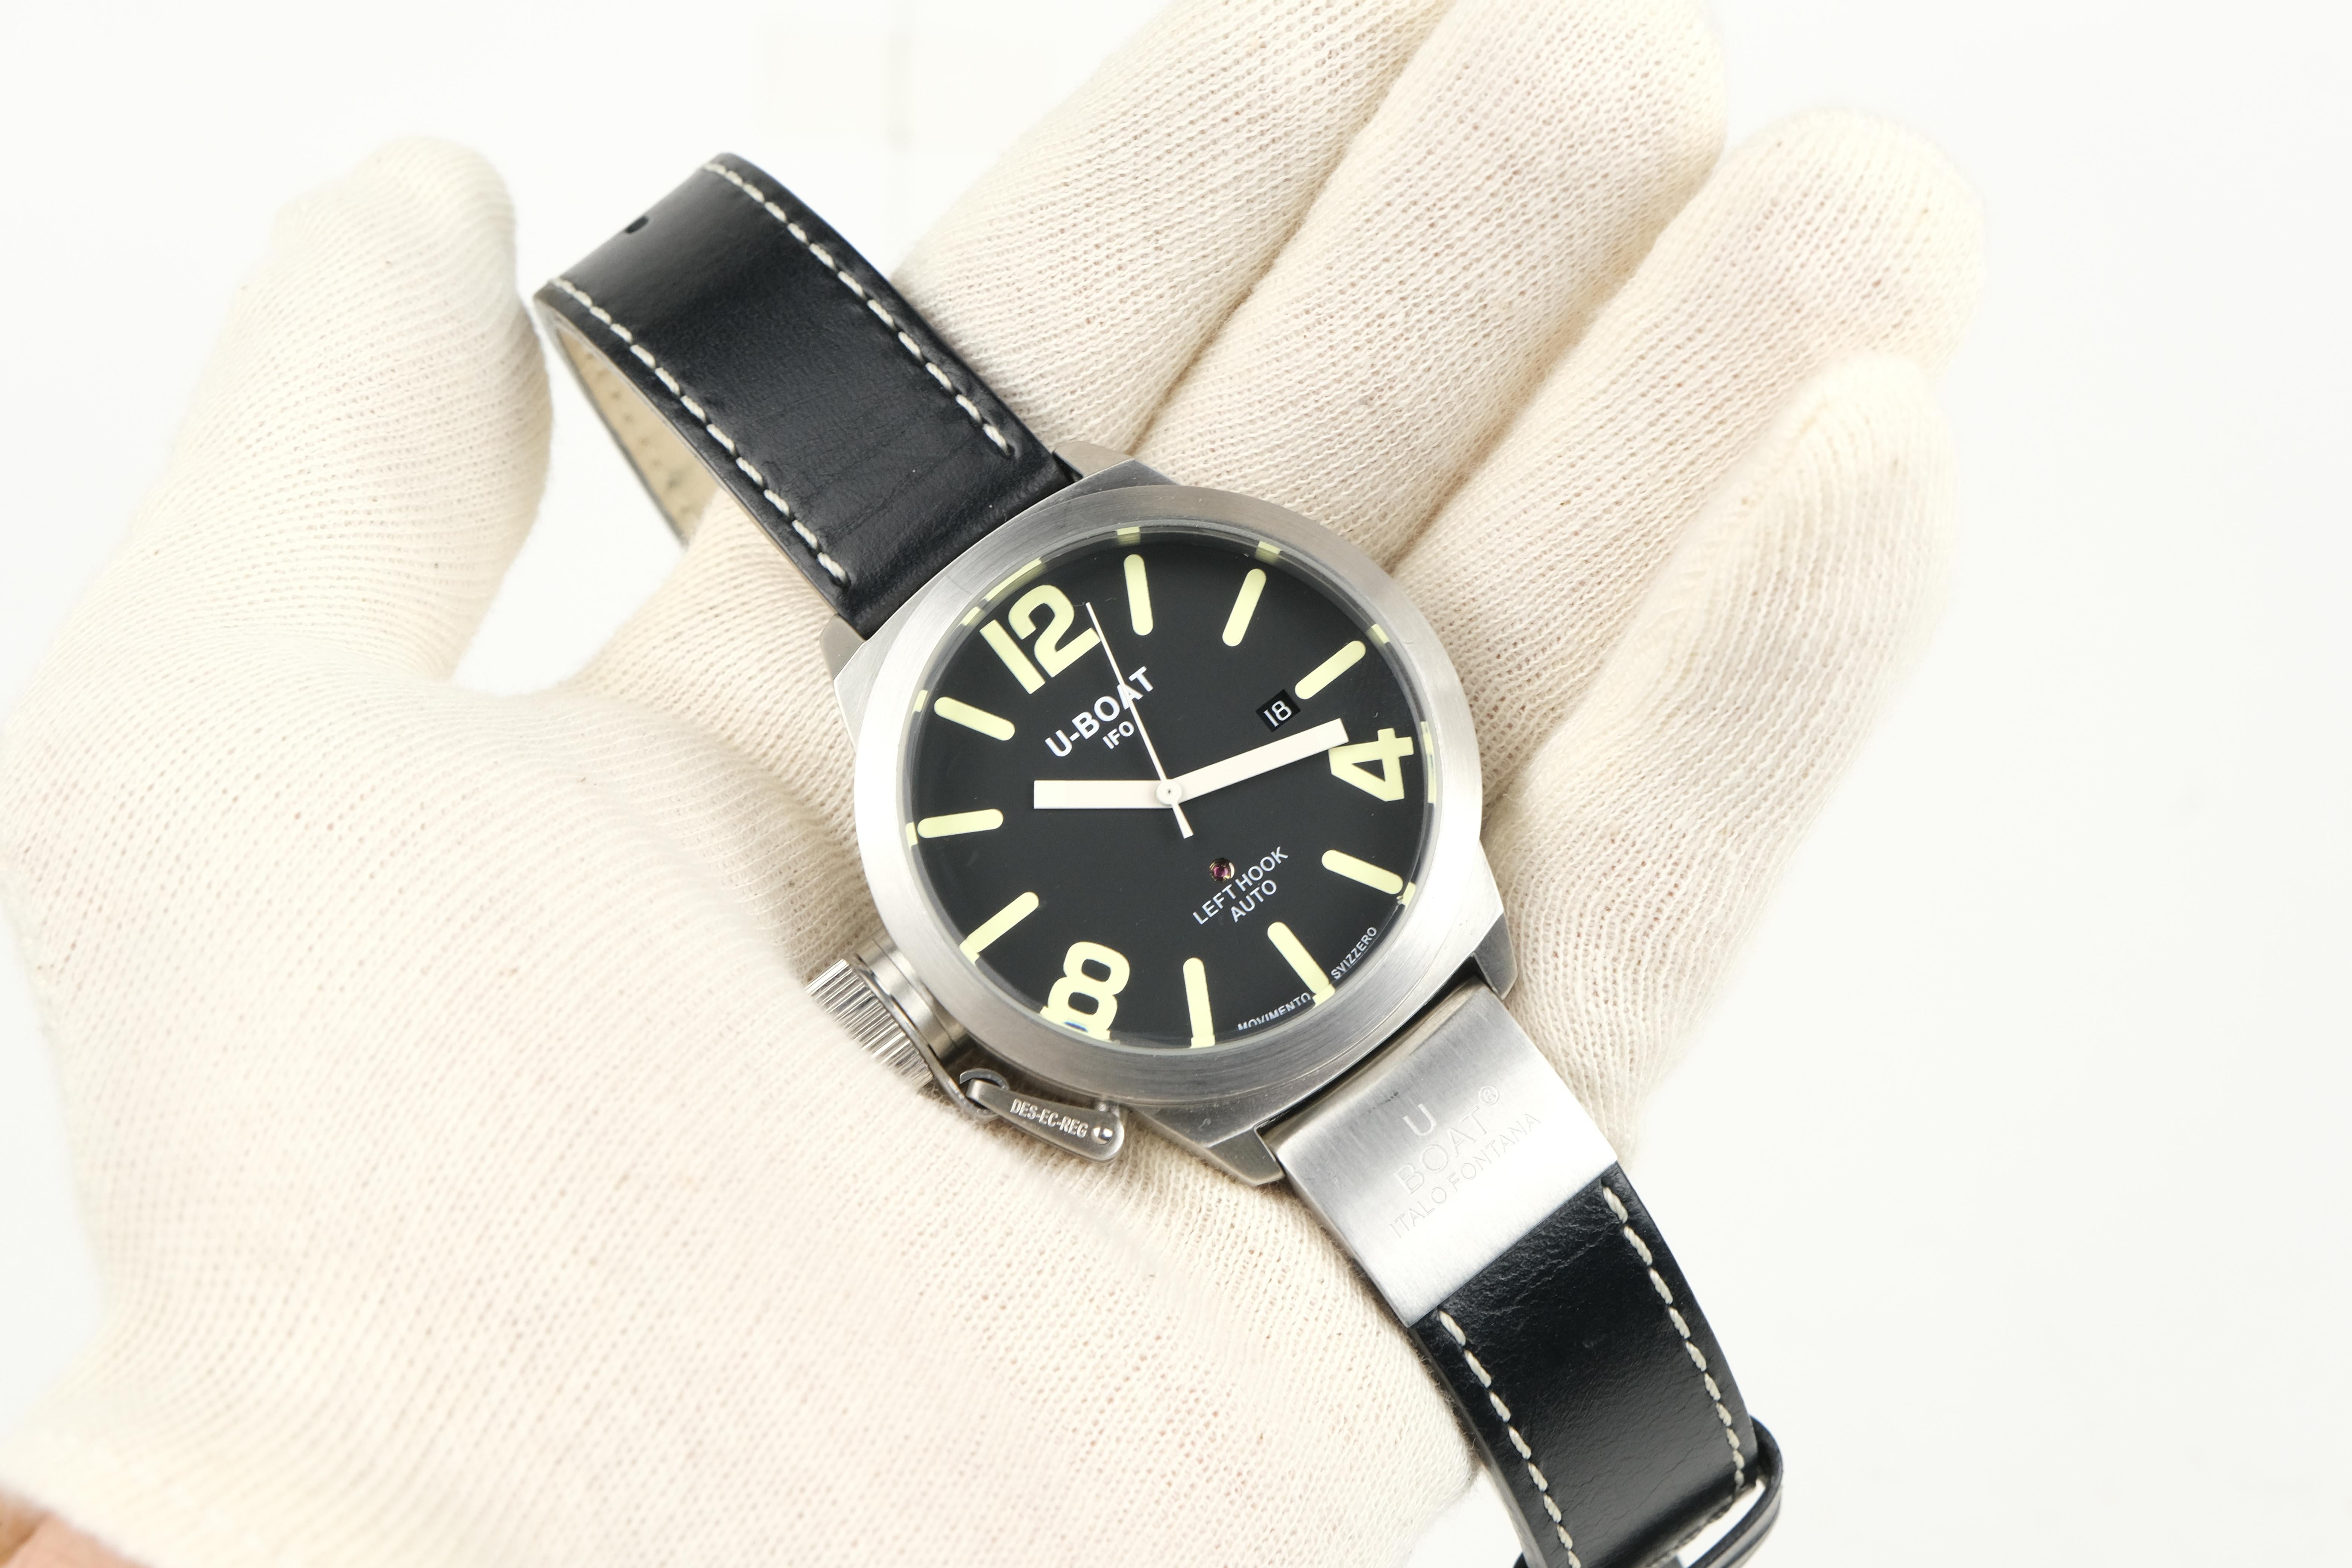 U-Boat IFO Left Hook Stainless Steel Automatic Wristwatch

BASIC INFO
Brand: U-Boat
Type: Wristwatch
Model Name: IFO
Bezel Material: Stainless Steel
Case Material: Stainless Steel
Caseback Material: Stainless Steel
Movement: U-Boat signed ETA Cal.